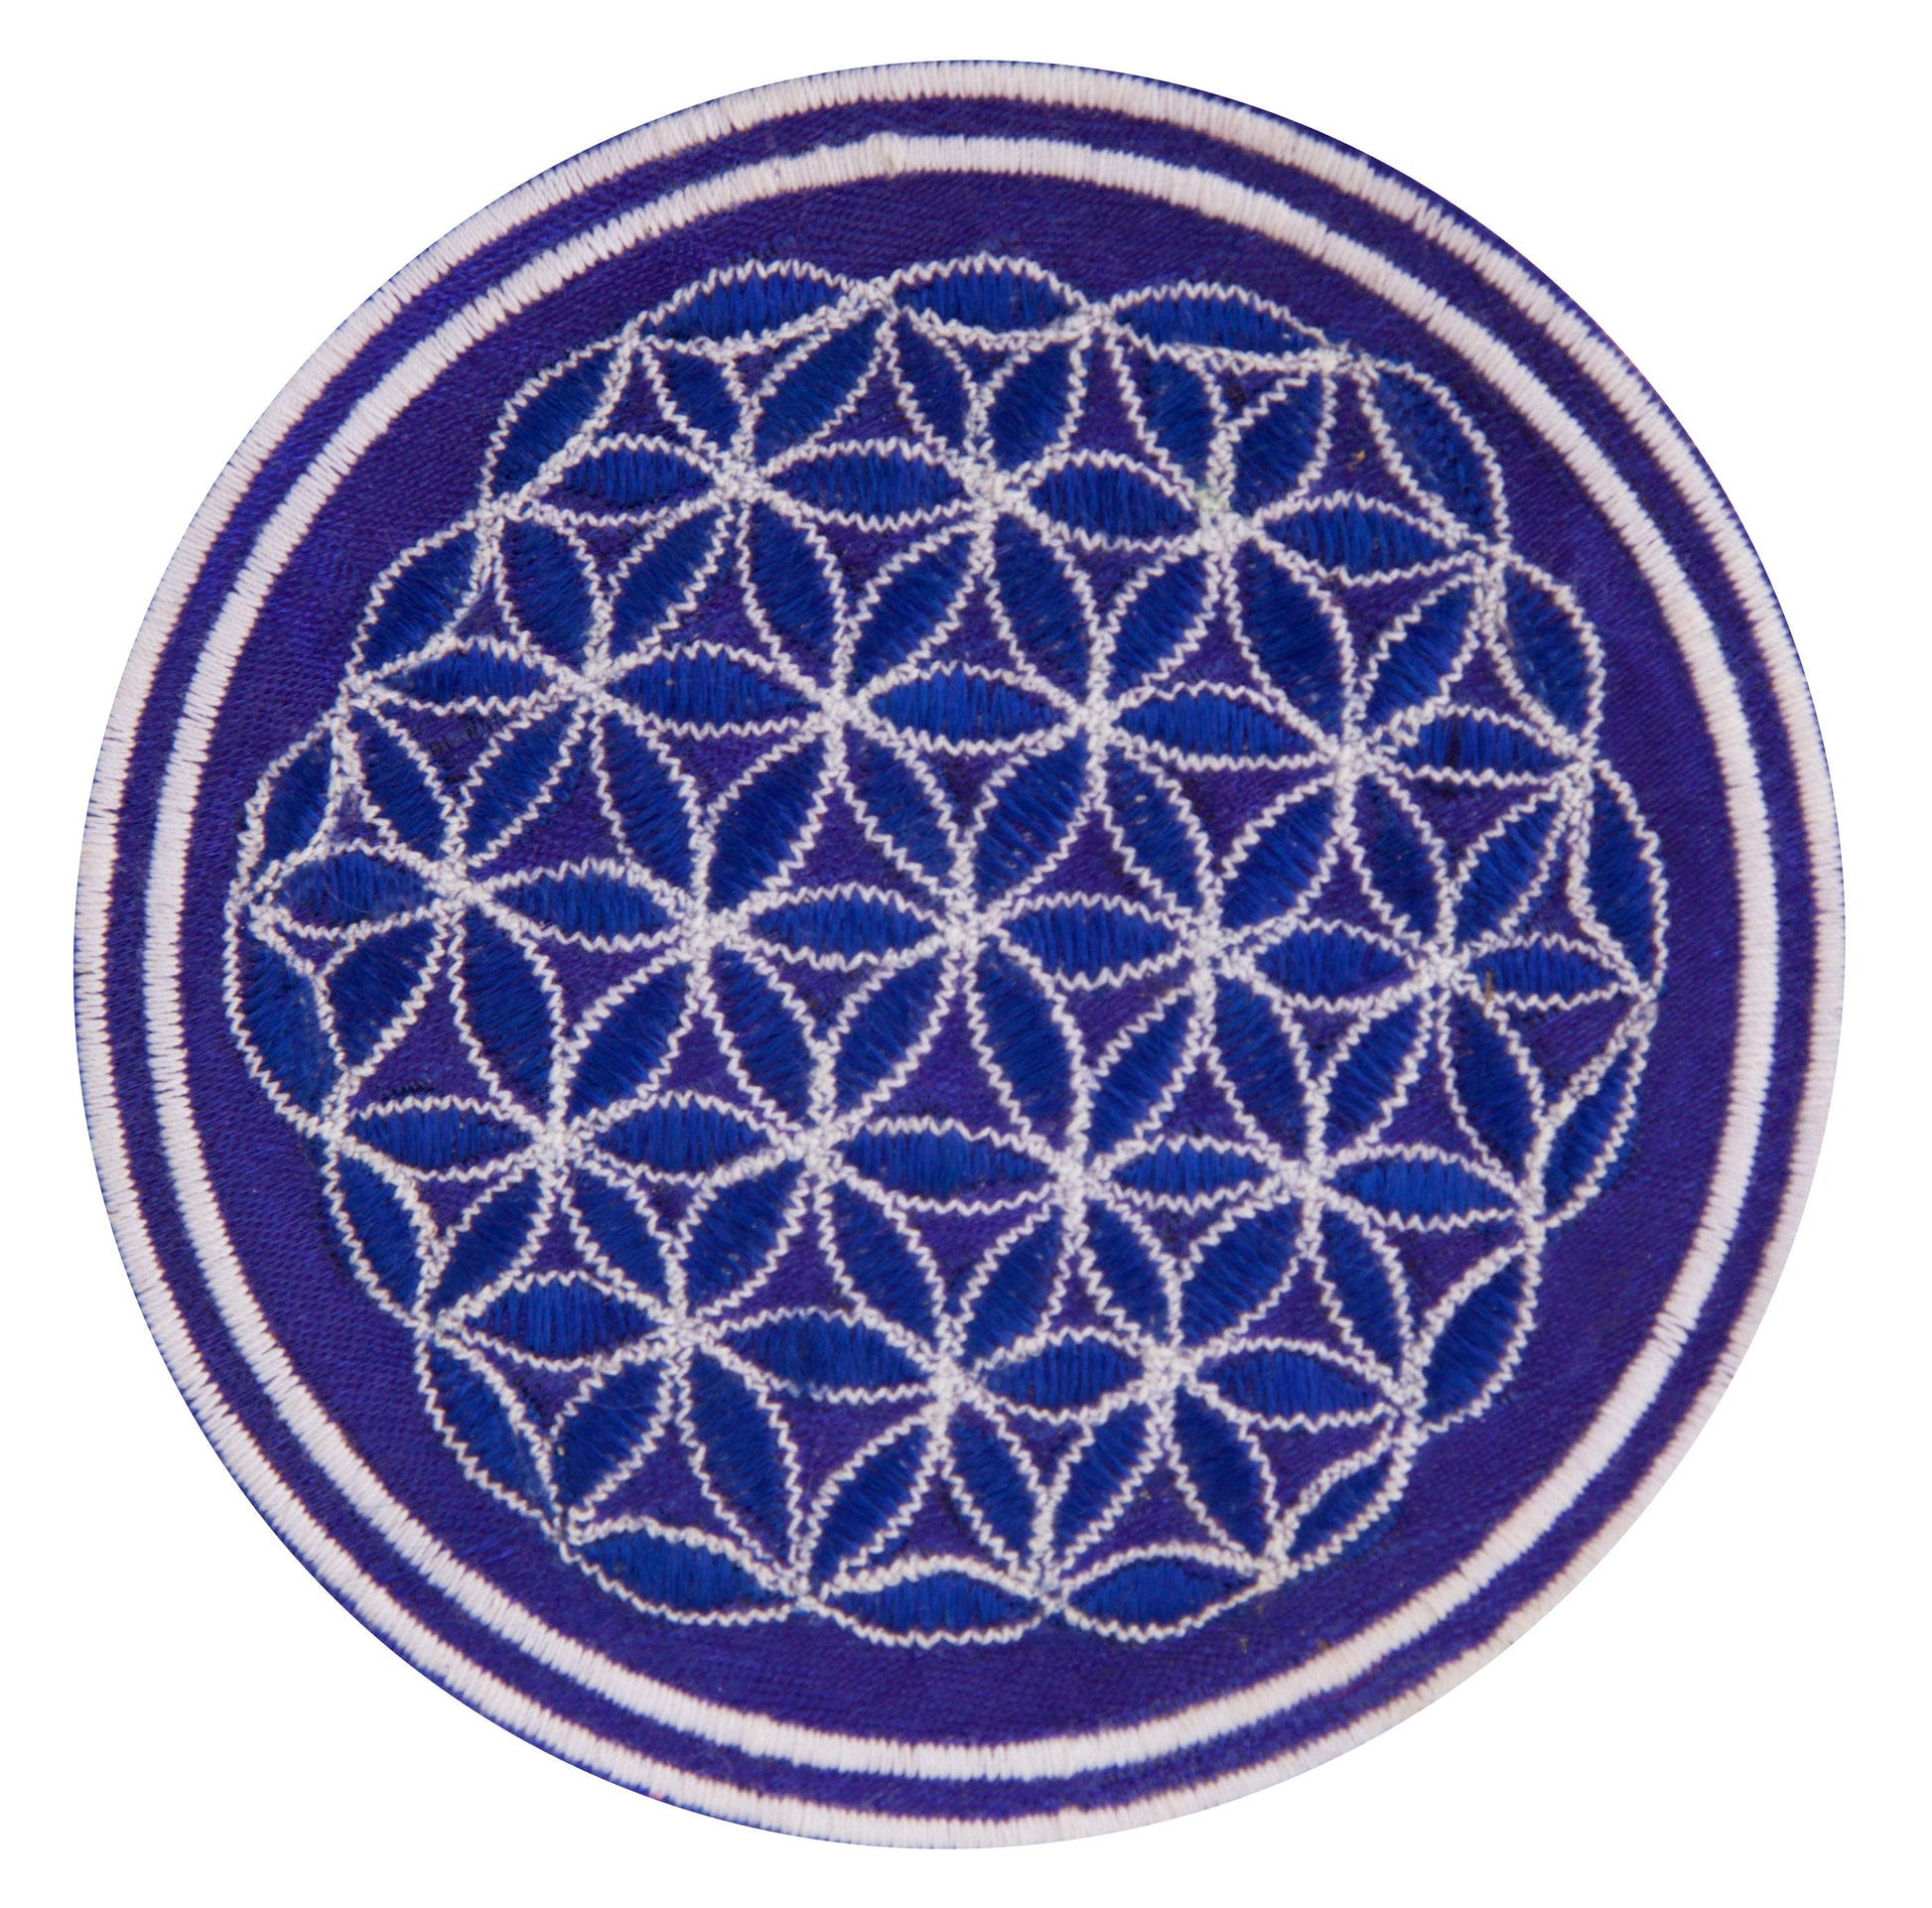 Turquese UV orange flower of life patch sacred geometry embroidery for sew on